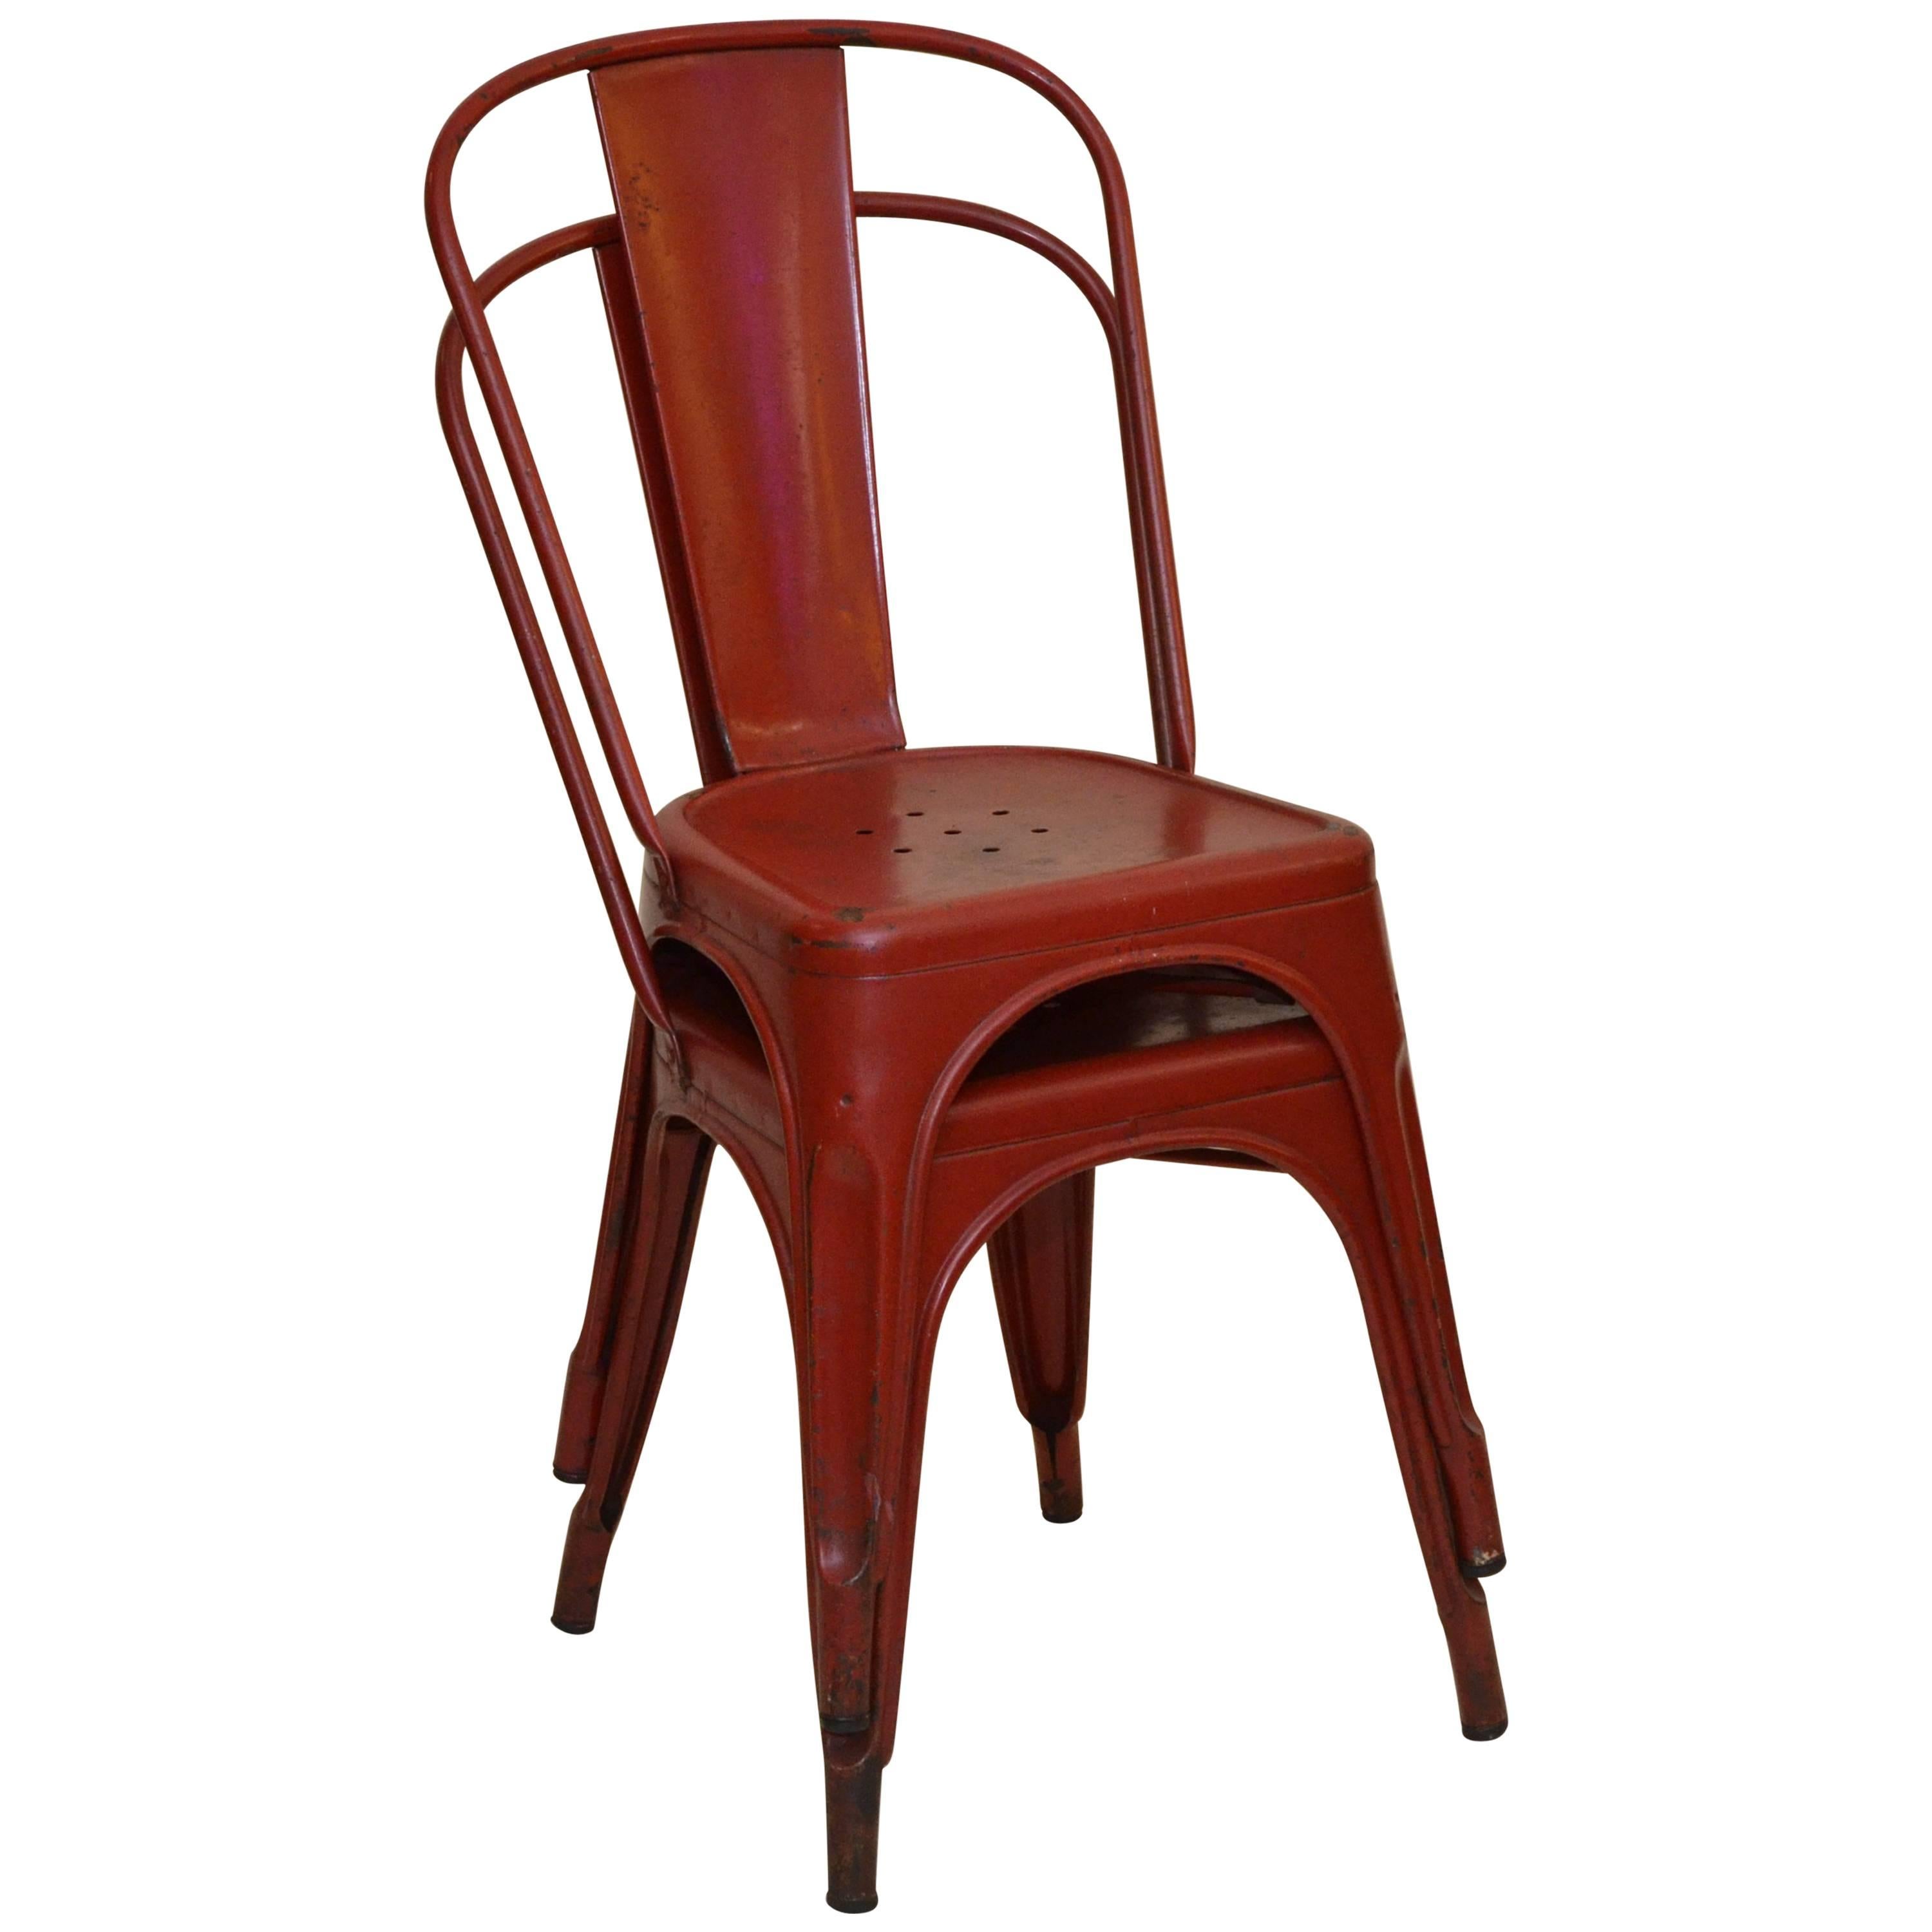 Pair of French bistrot chairs designed by Xavier Pauchard for Tolix. Those chairs presents the very nice original red color and the original label on the back.

Collector’s note:

The Model A chair has become an icon of industrial aesthetics.